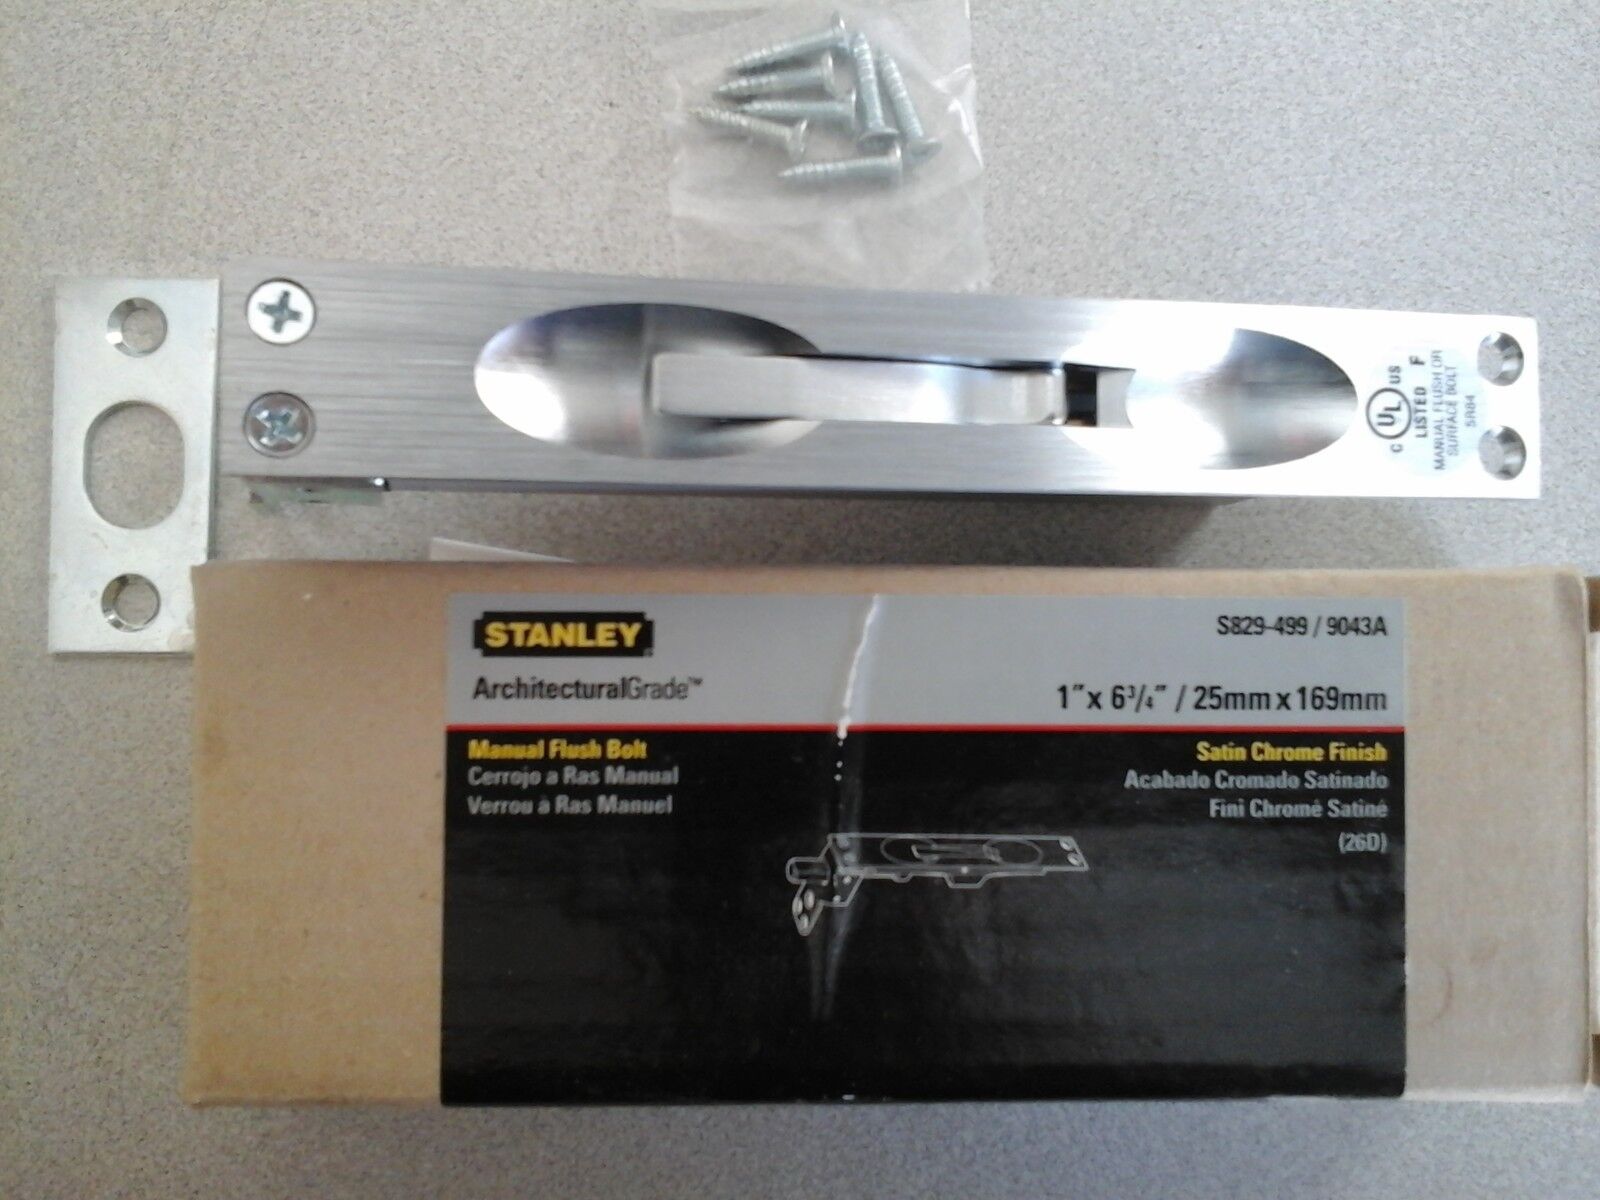 Stanley Manual Flush Bolt Satin Max 76% OFF R Chrome 9043A Finish S829-499 Outstanding